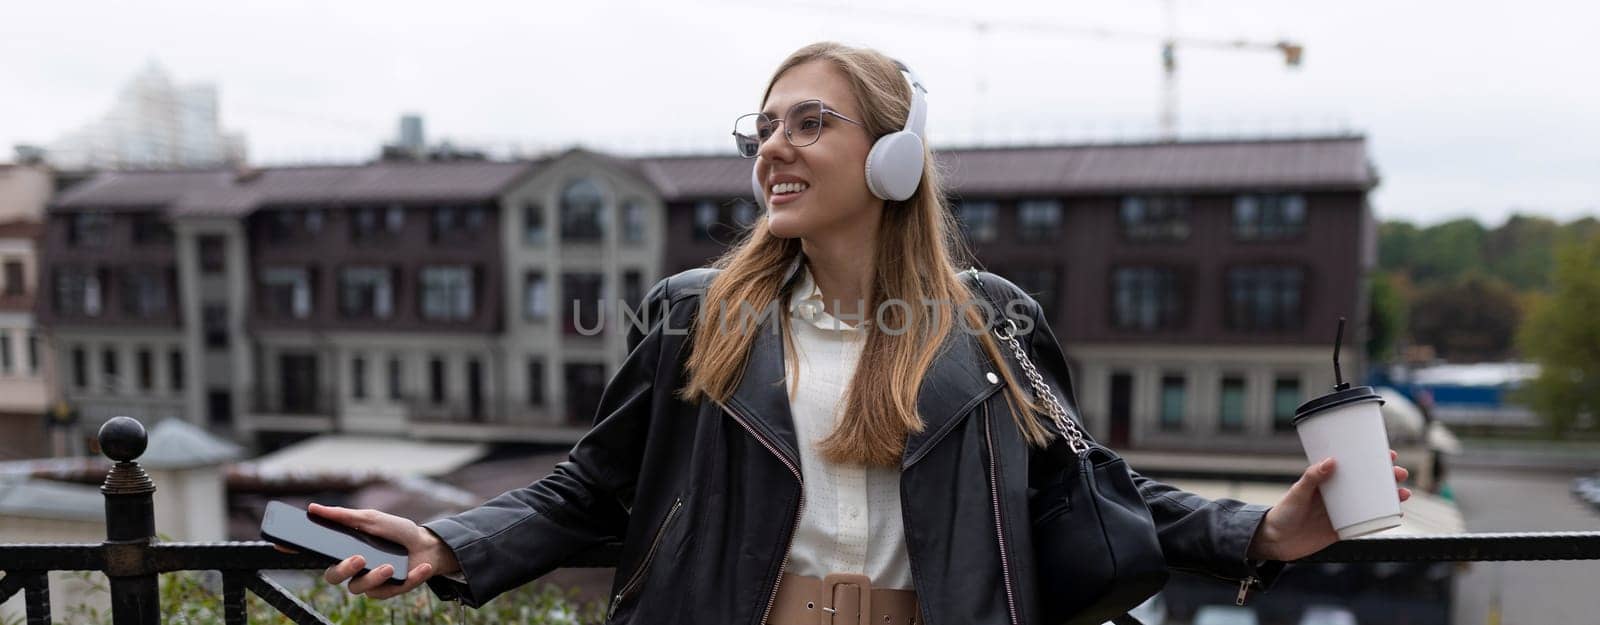 young cheerful woman listening to music in headphones with a cup of coffee in her hands in the city by TRMK